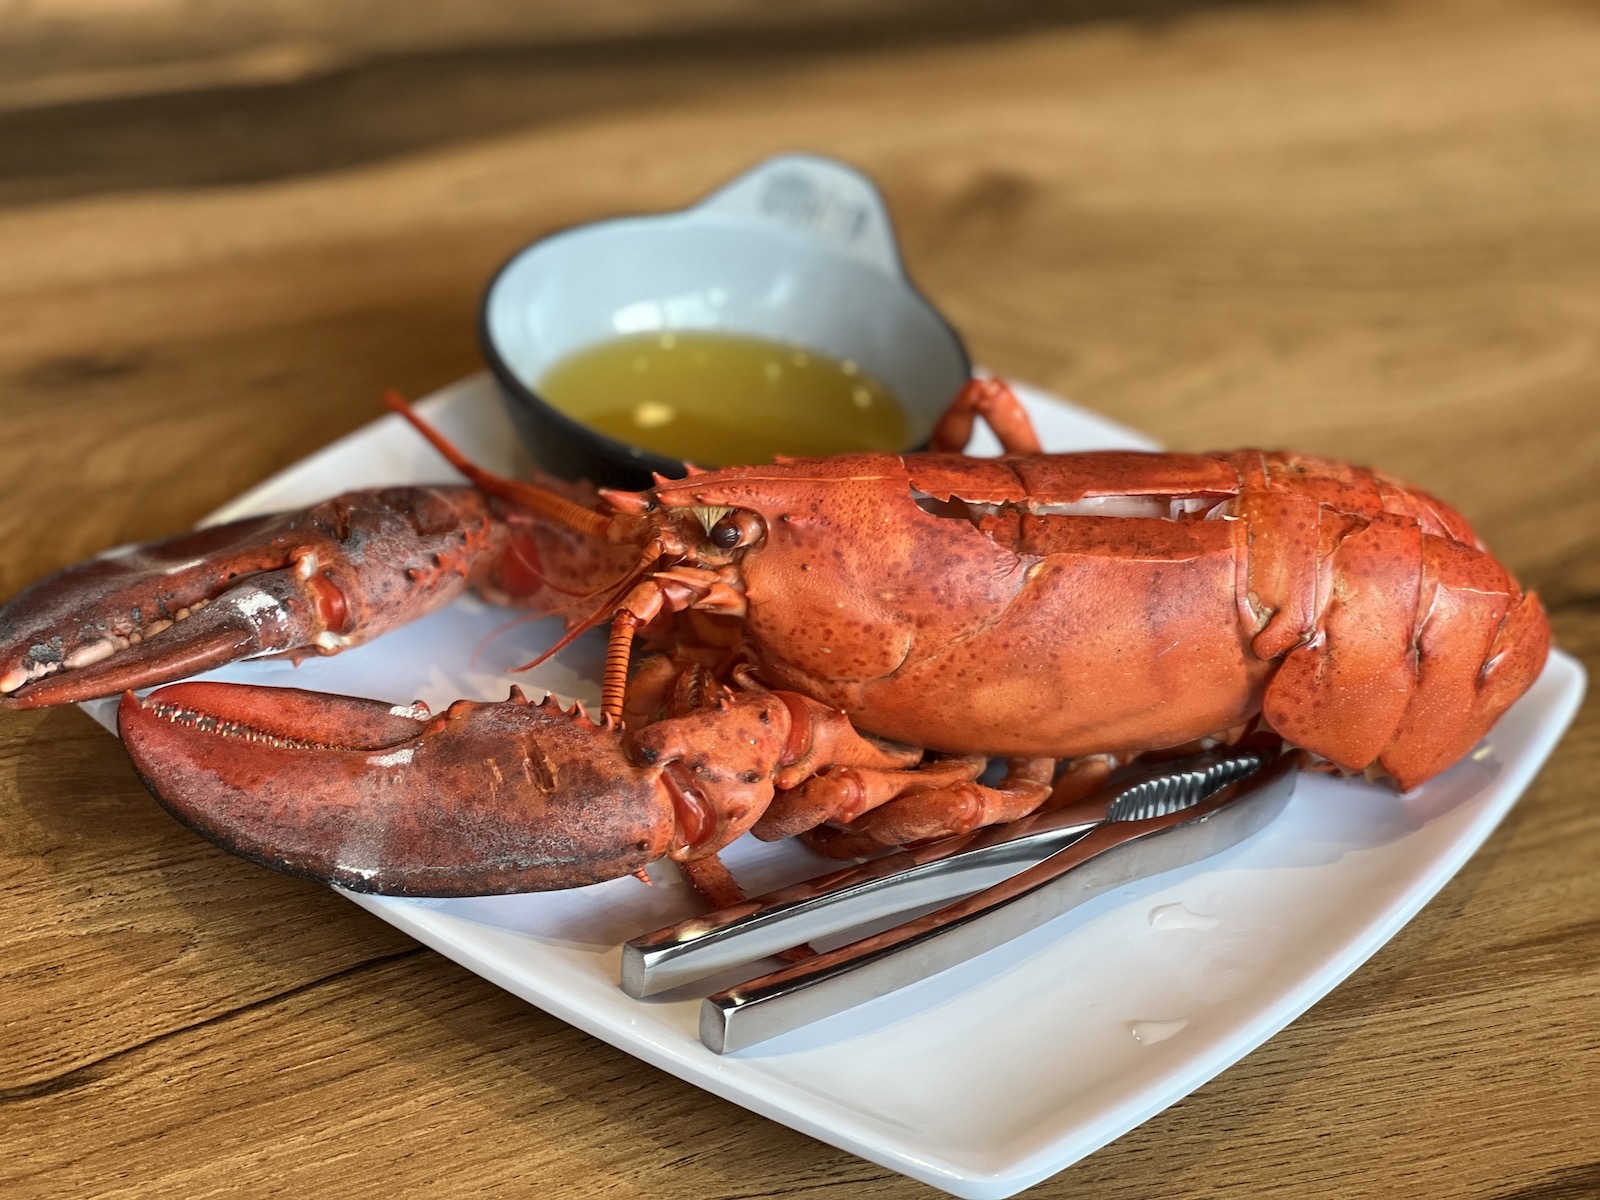 Steamed lobster with melted butter